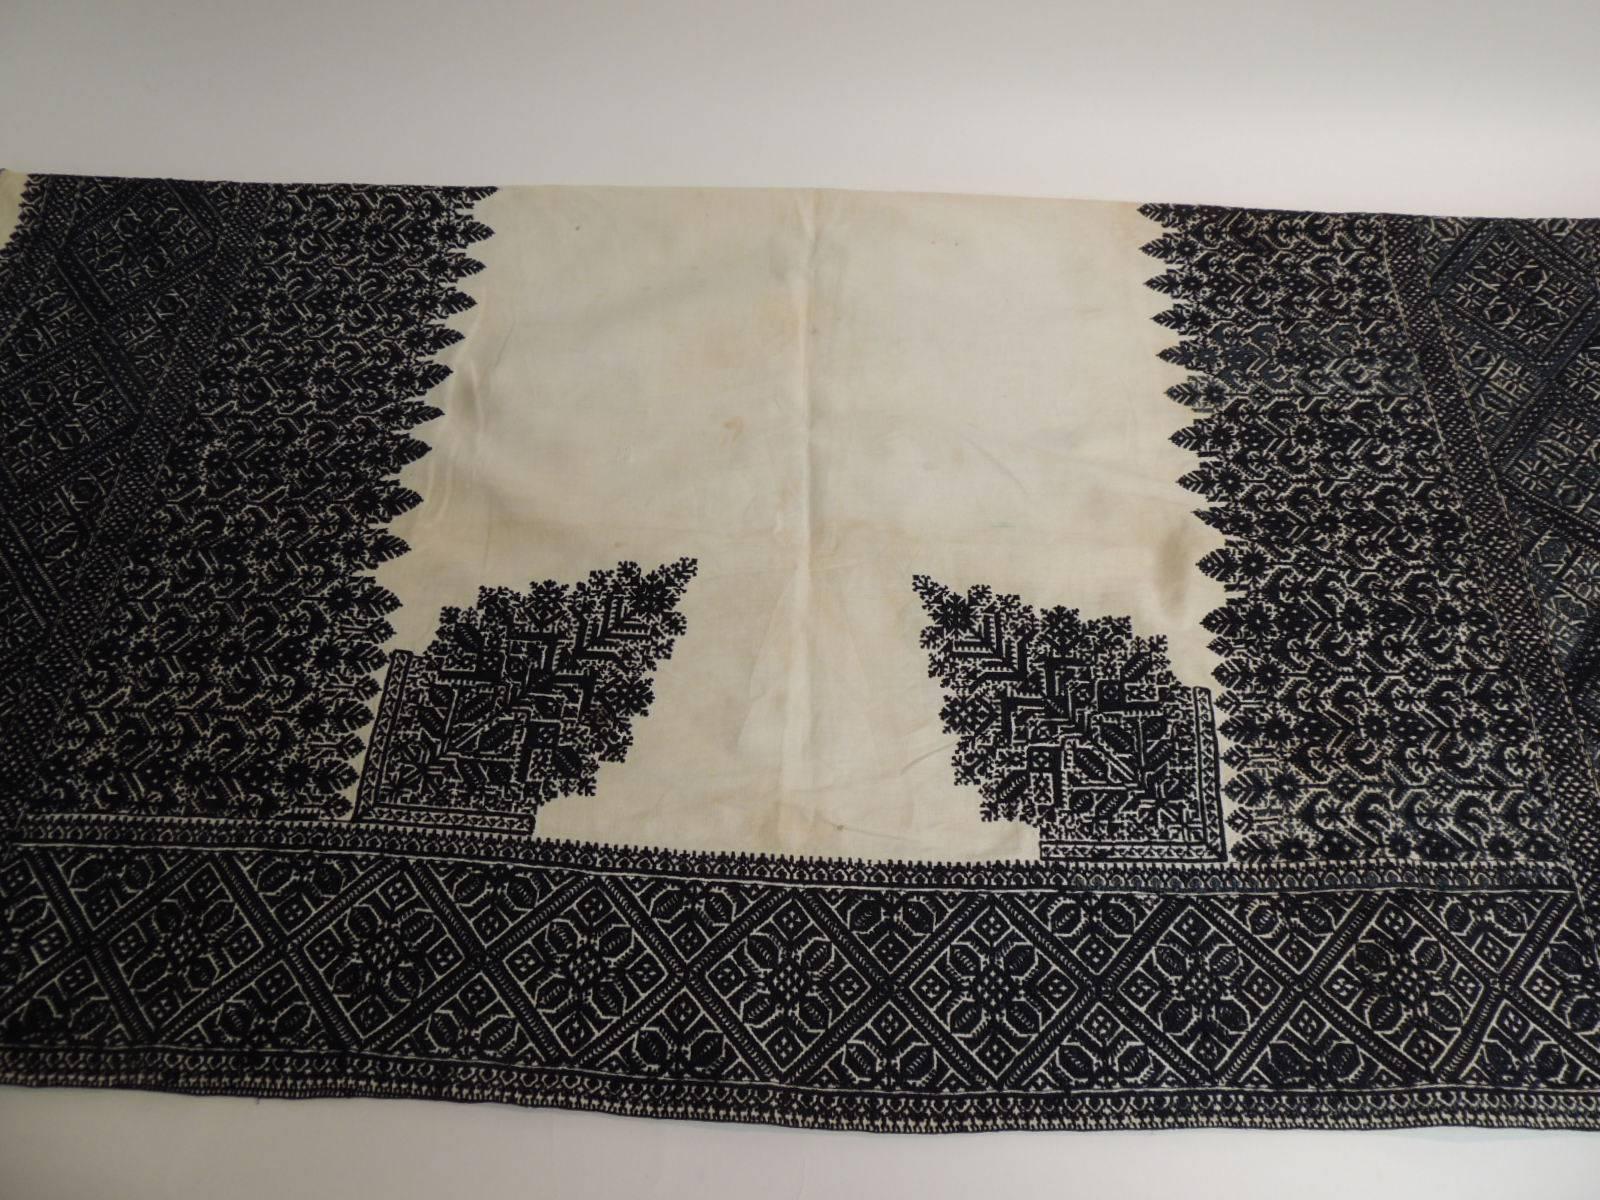 Hand-Crafted 19th Century Indigo and Black Embroidery Moroccan Fez Cloth